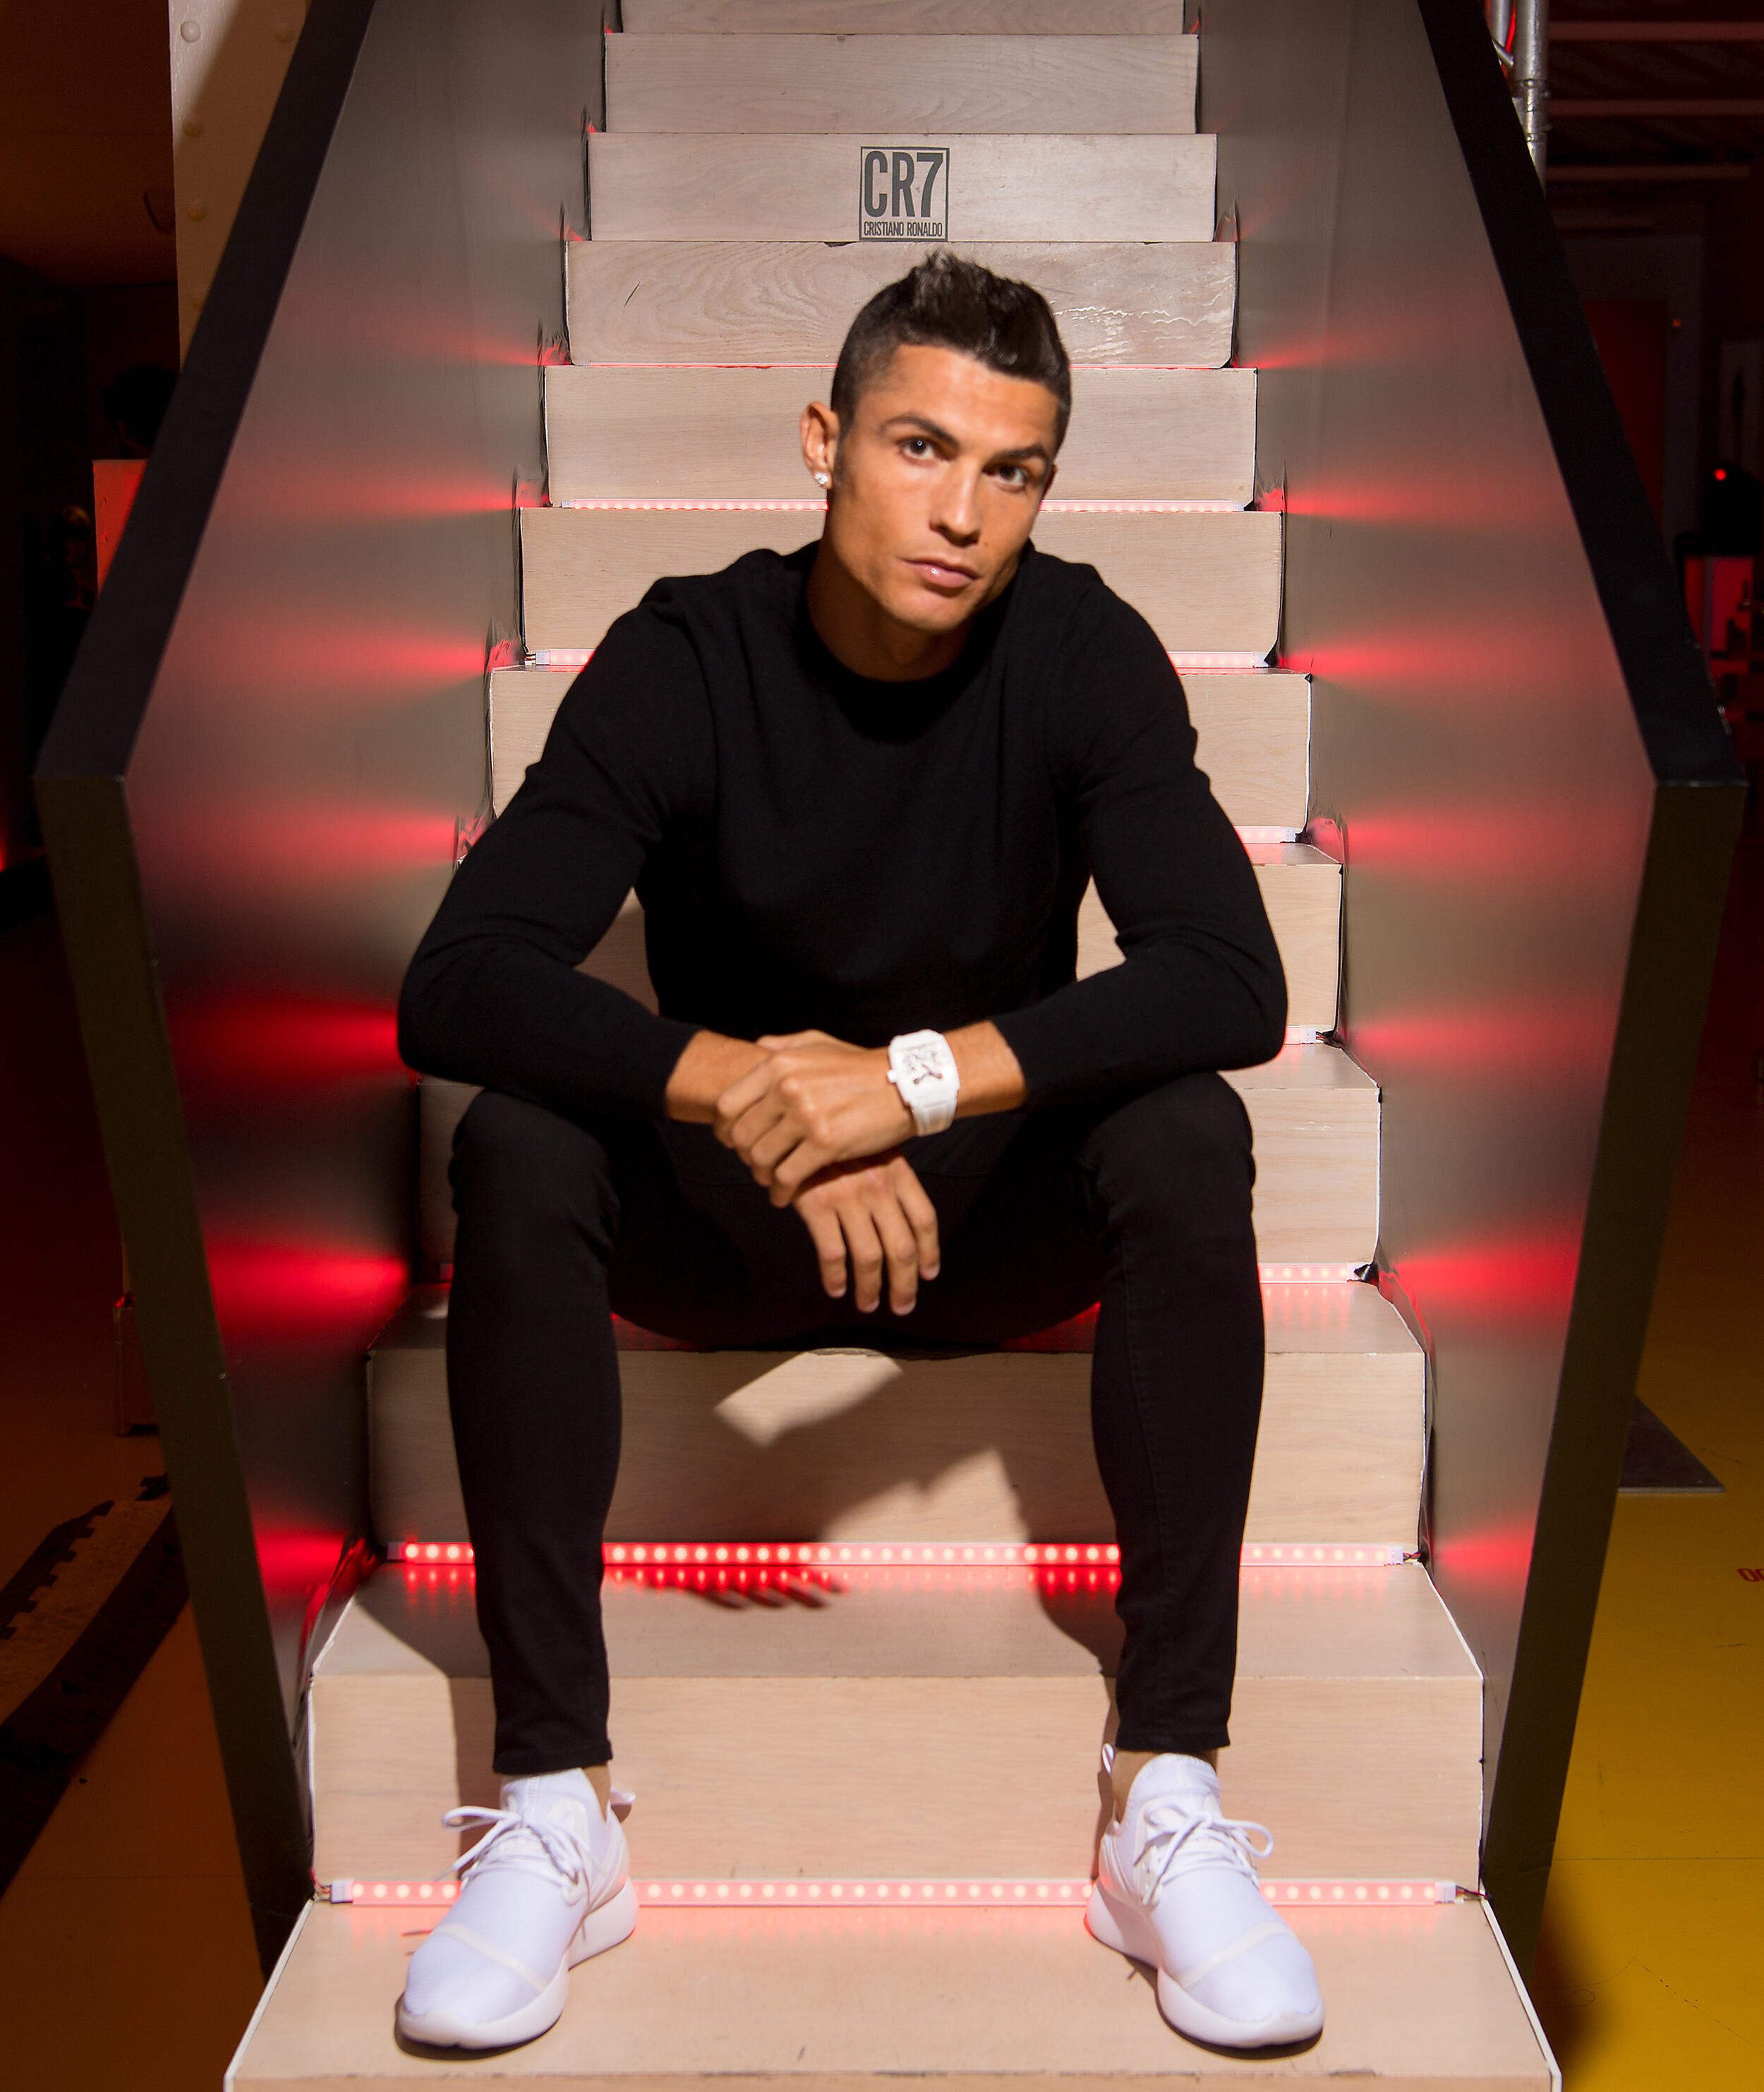 foto: Photo by David Ramos/Getty Images for CR7/ Getty Images Sport